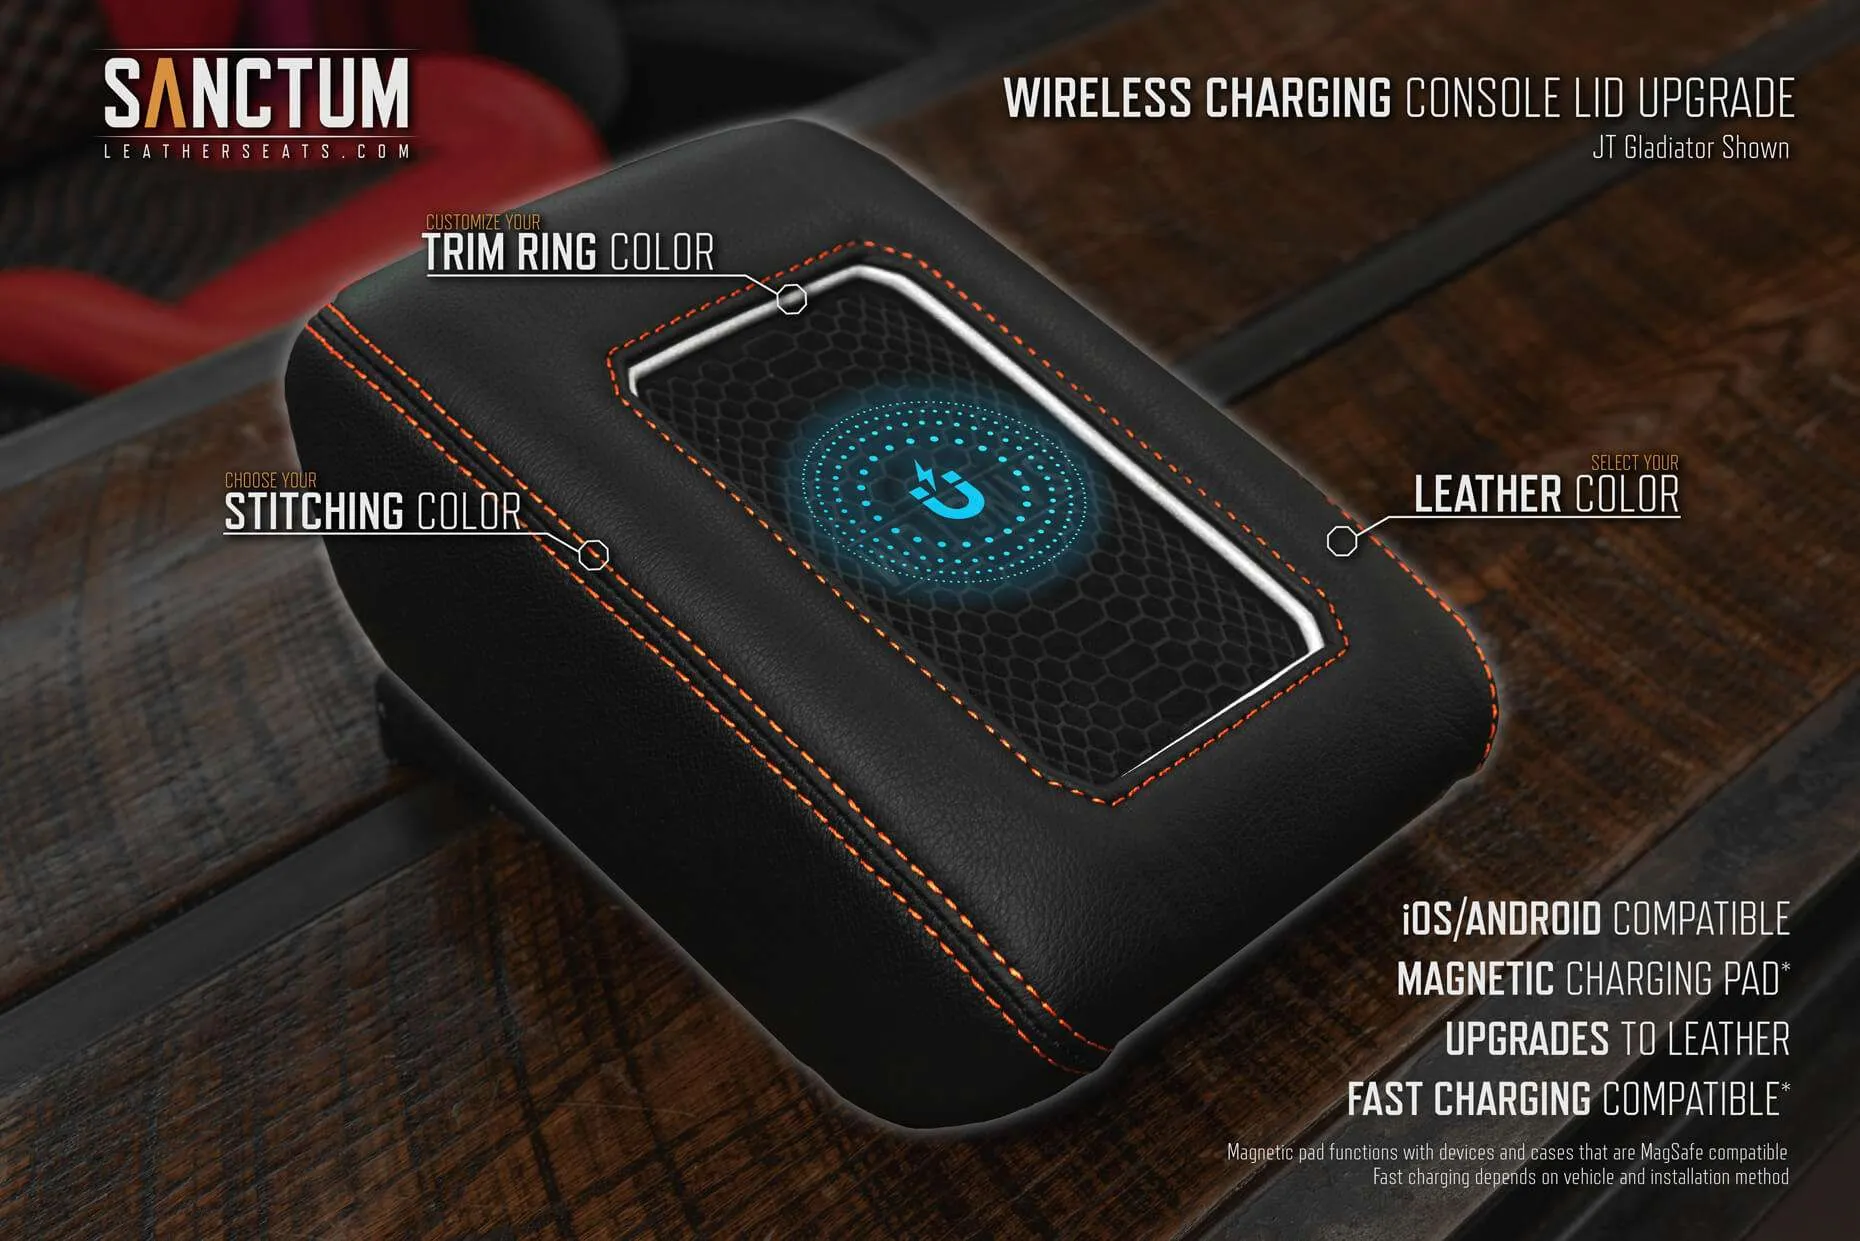 Jeep JT Gladiator Sanctum Wireless Charging Console Features